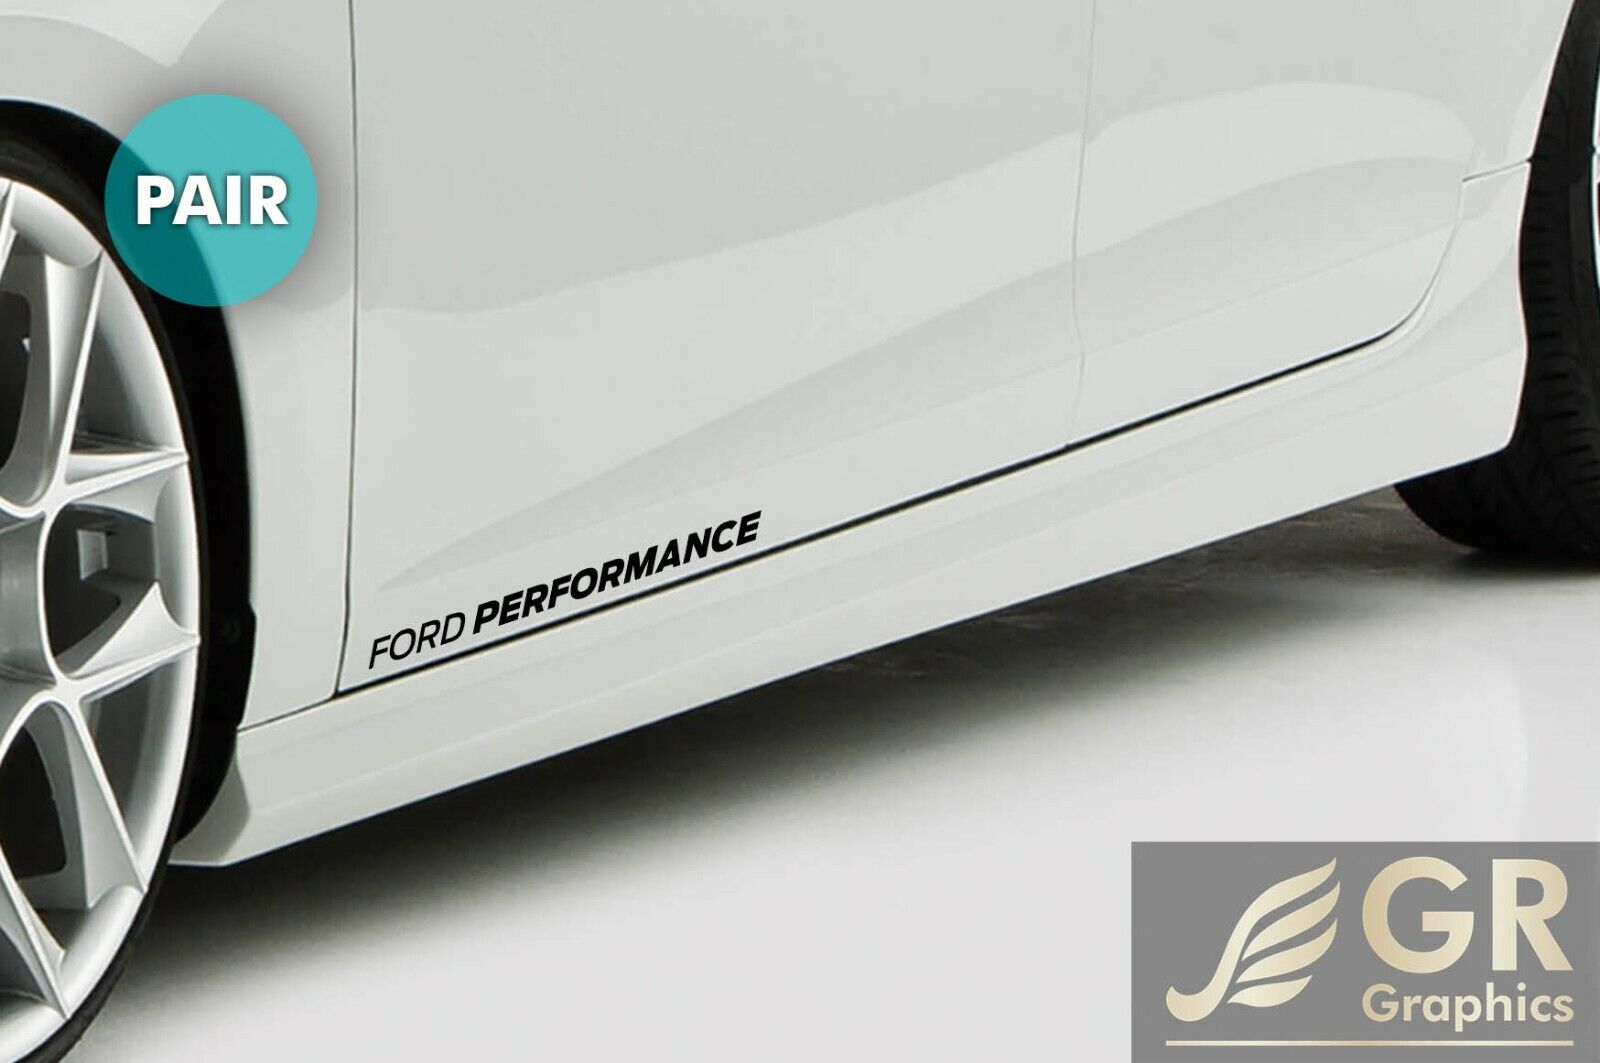 2X FORD PERFORMANCE Decal Sticker 11\